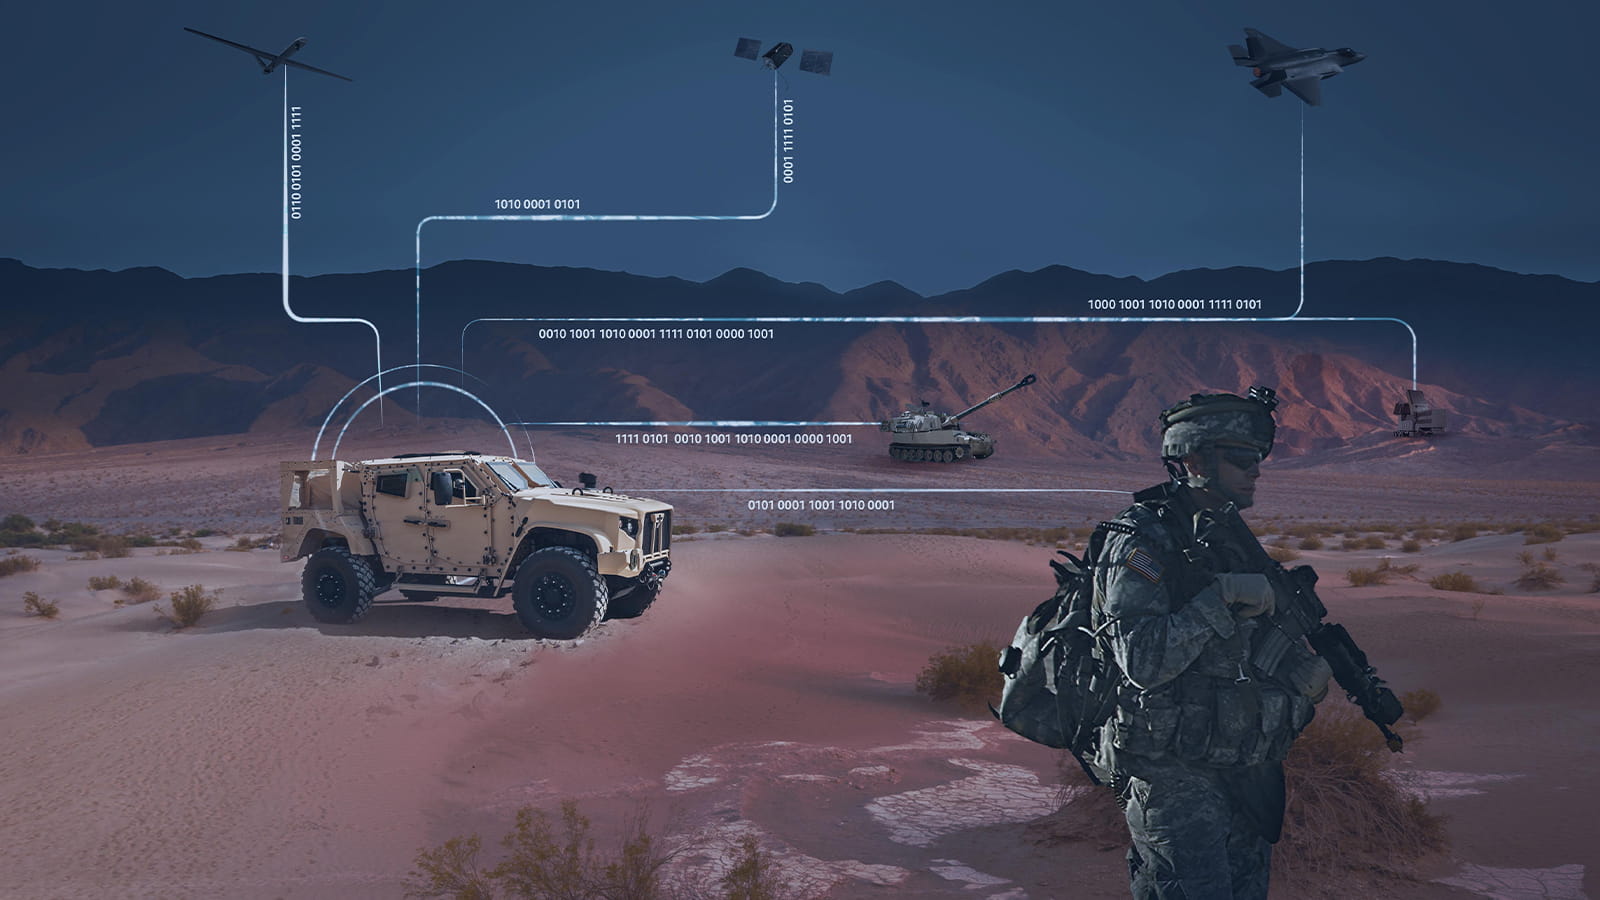 Soldier and armored vehicle in desert